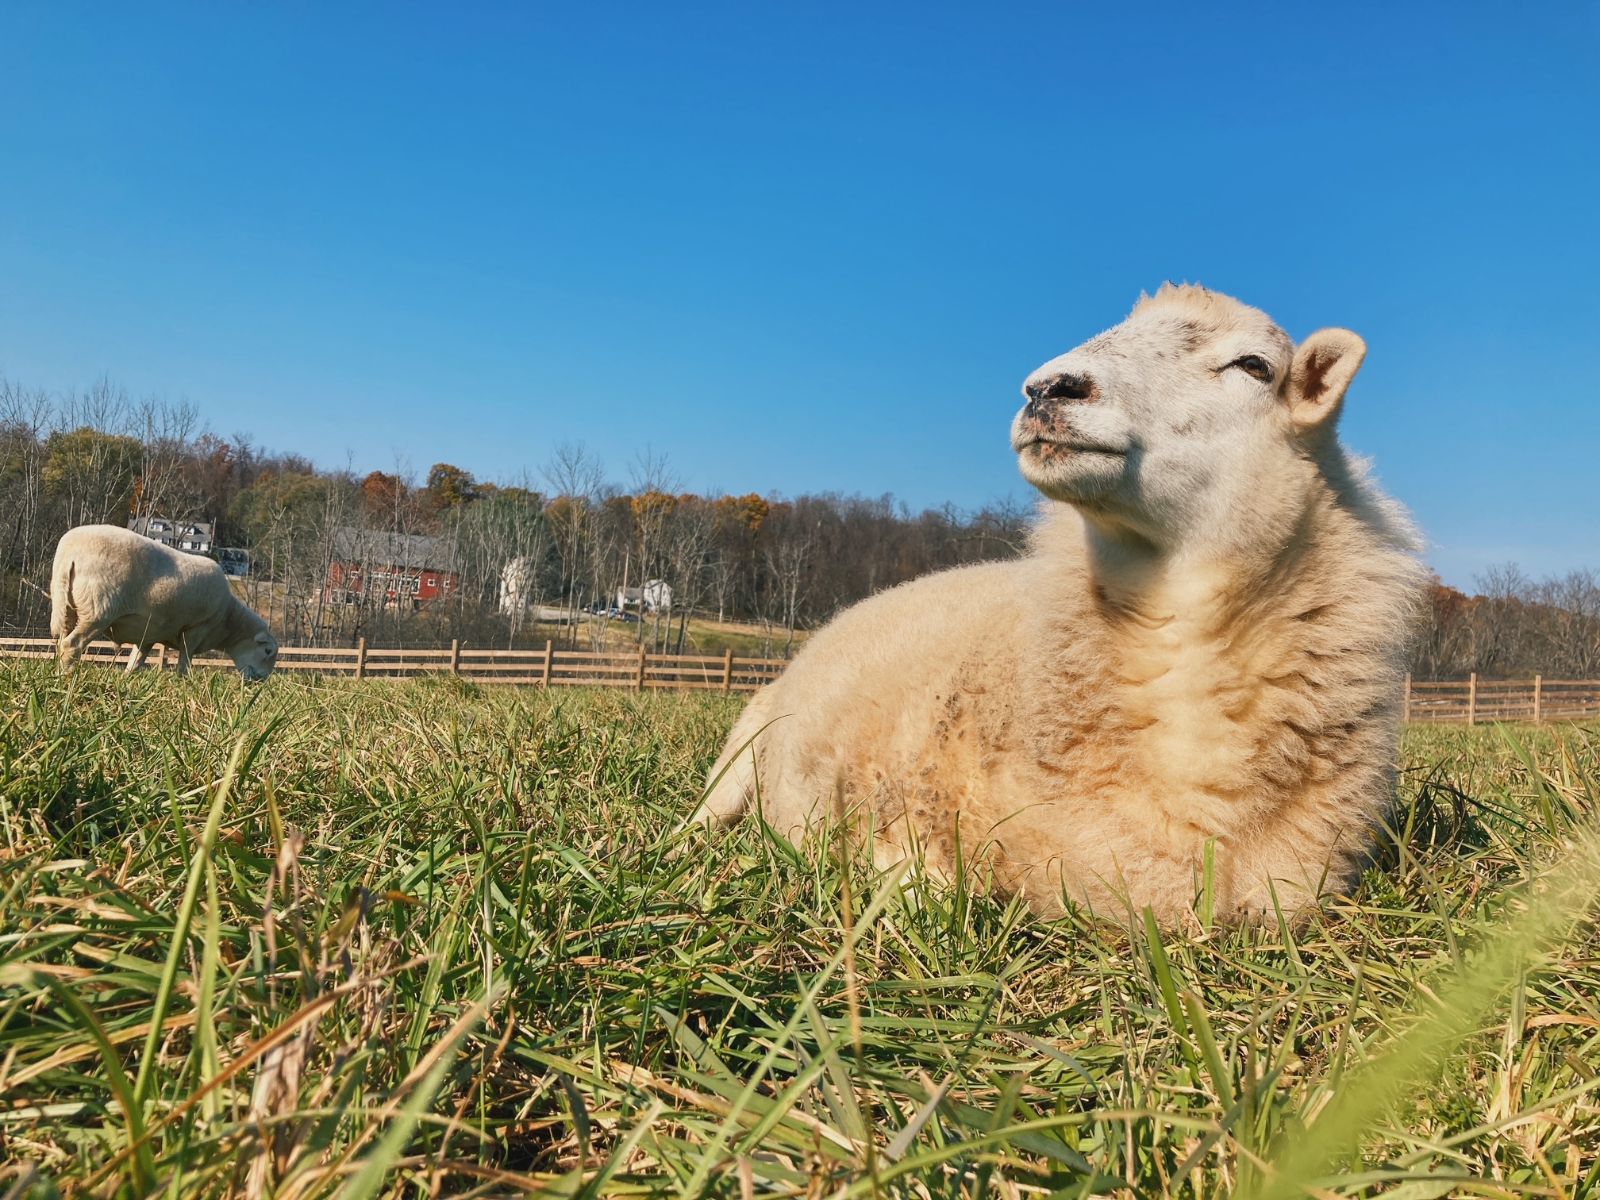 A fuzzy sheep sits in a green, grassy field. He is looking off to the left and l